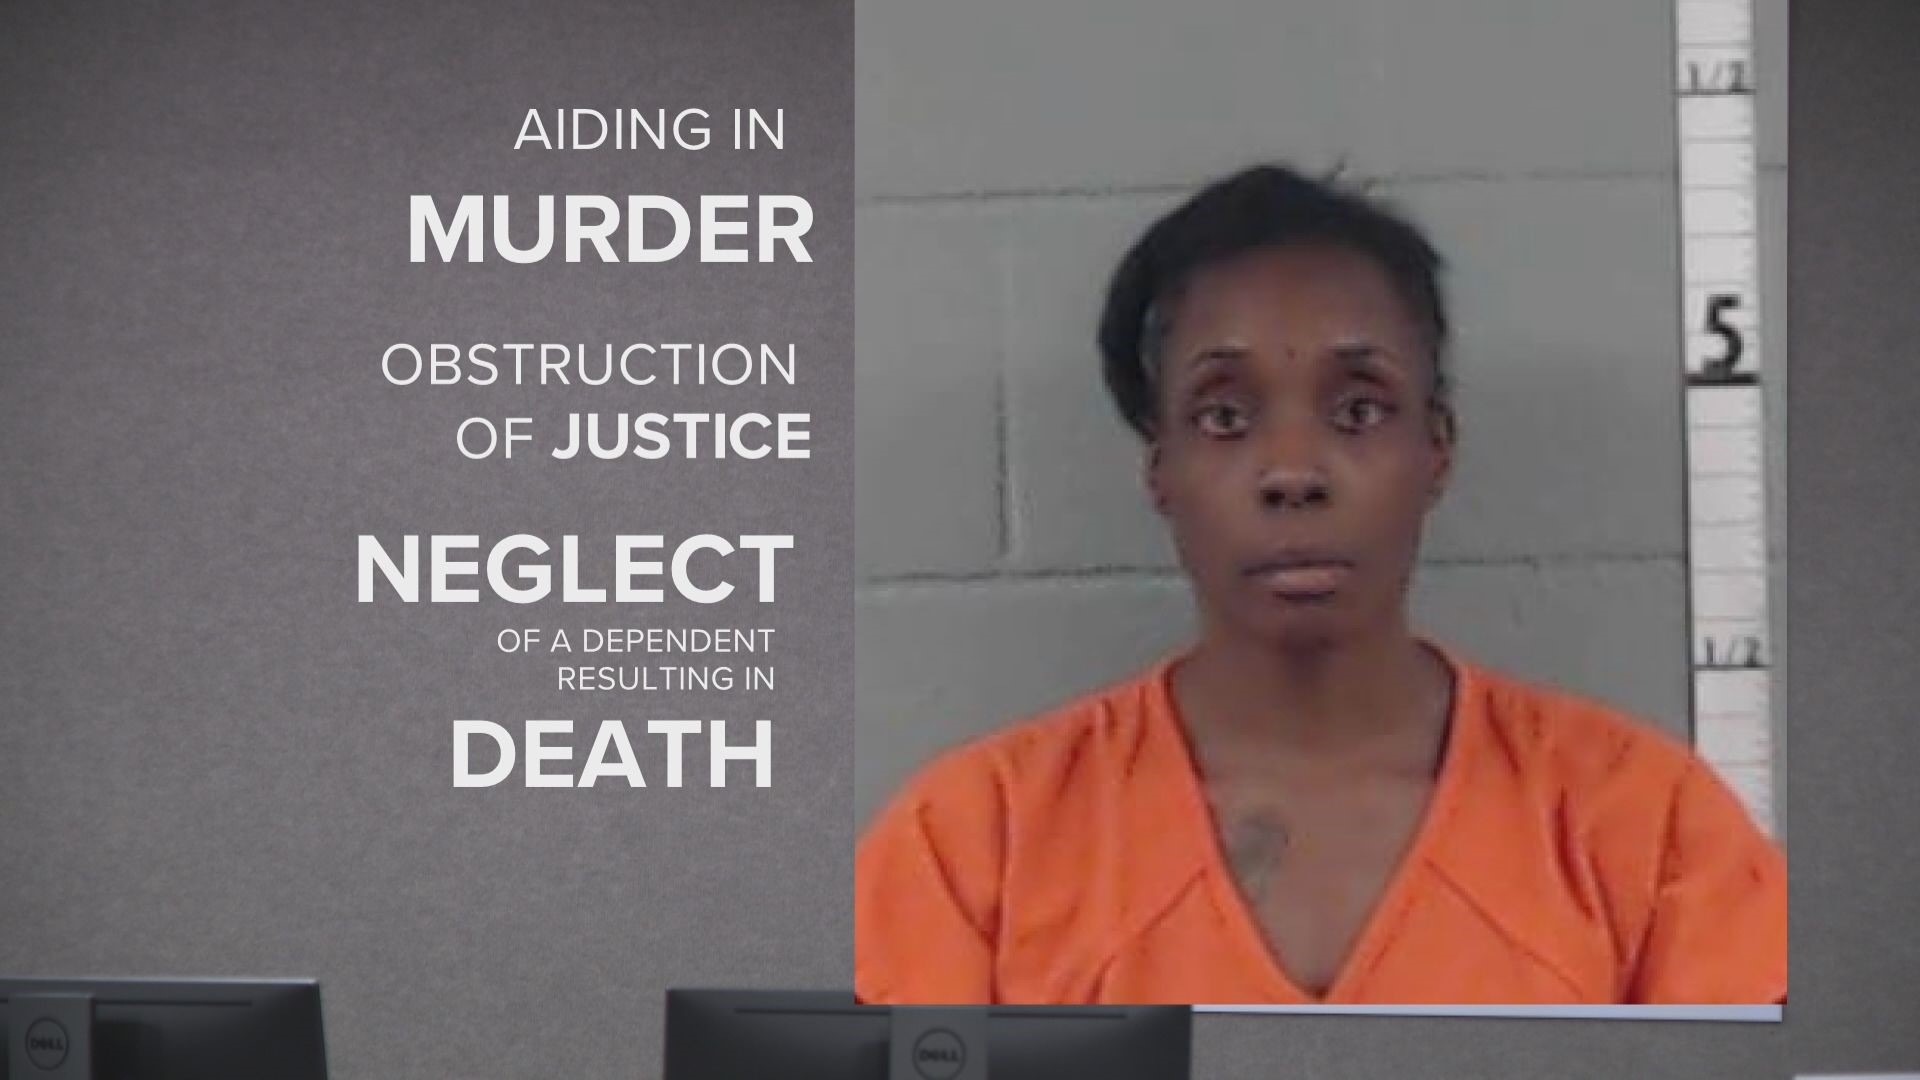 Dawn Coleman is now facing new charges, after the prosecutor said she aided in Cairo Jordan's murder. Her bond is set at $5 million.